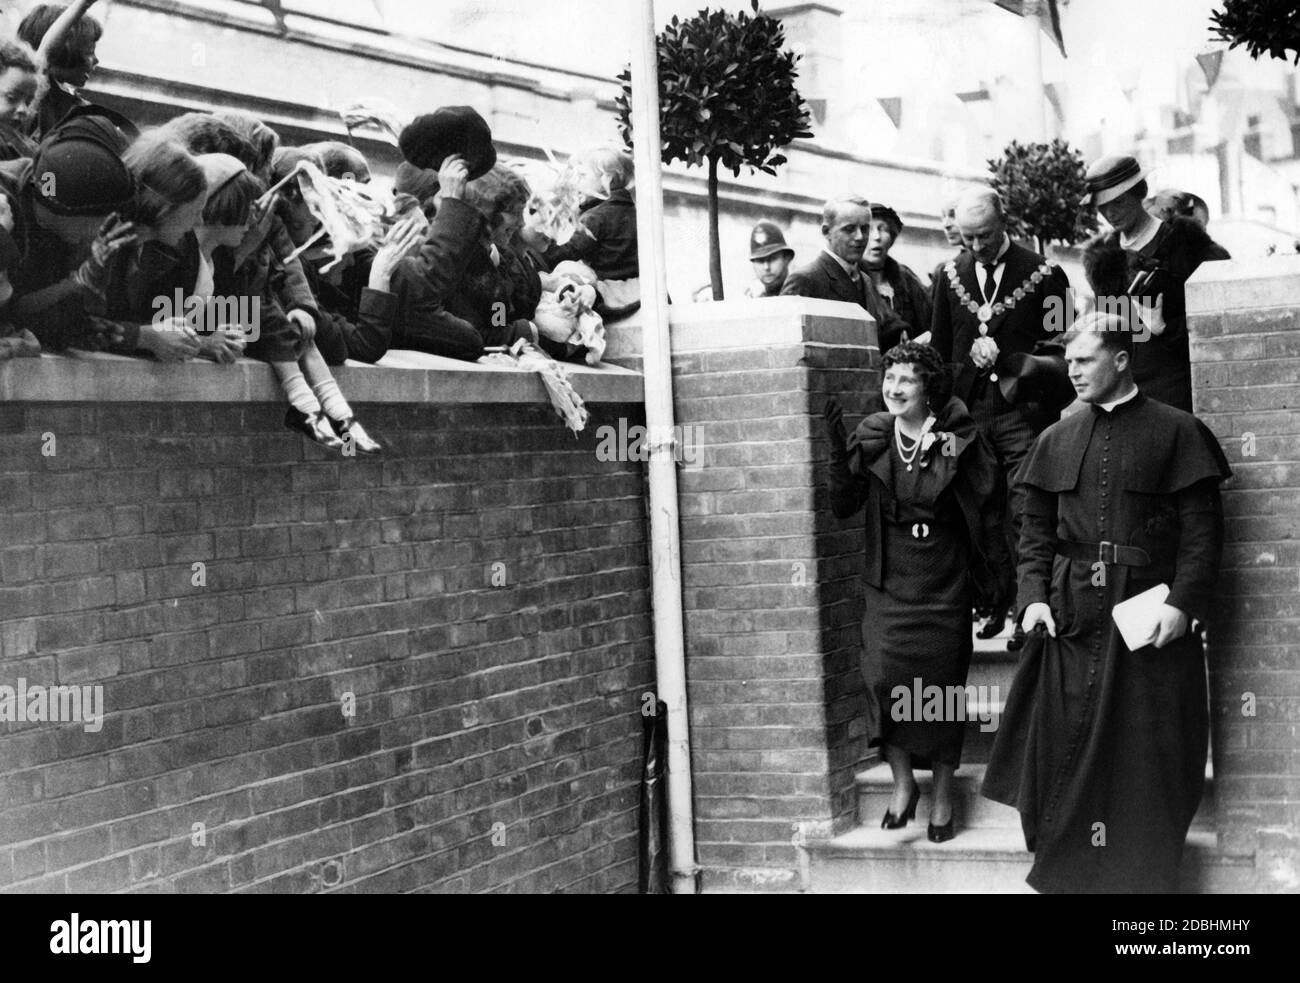 Elizabeth, Duchess of York, at the inauguration of Basil Jellicoe Hall and a new apartment block in Drummnond Crescent, Somers Town in London. The Social and Occupational Centre was founded as a memorial to the young, deceased priest Basil Jellicoe, who transformed a London slum into a garden city in 1935. The Duchess is greeted by the residents and her children with smiles and waves. Stock Photo